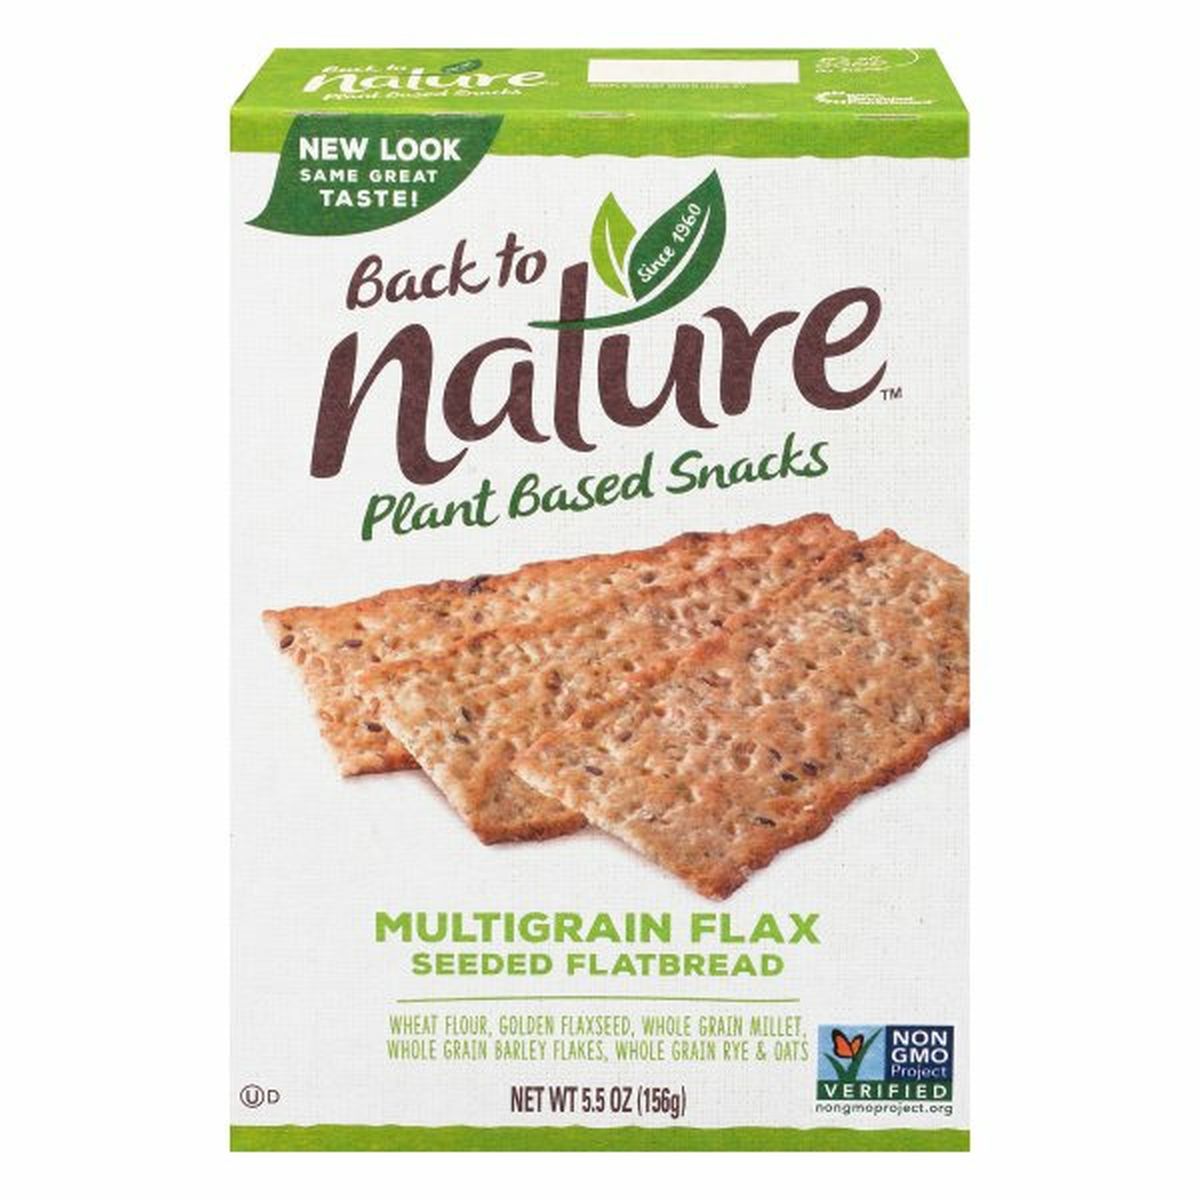 Calories in Back to Nature Flatbread, Seeded, Multigrain Flax